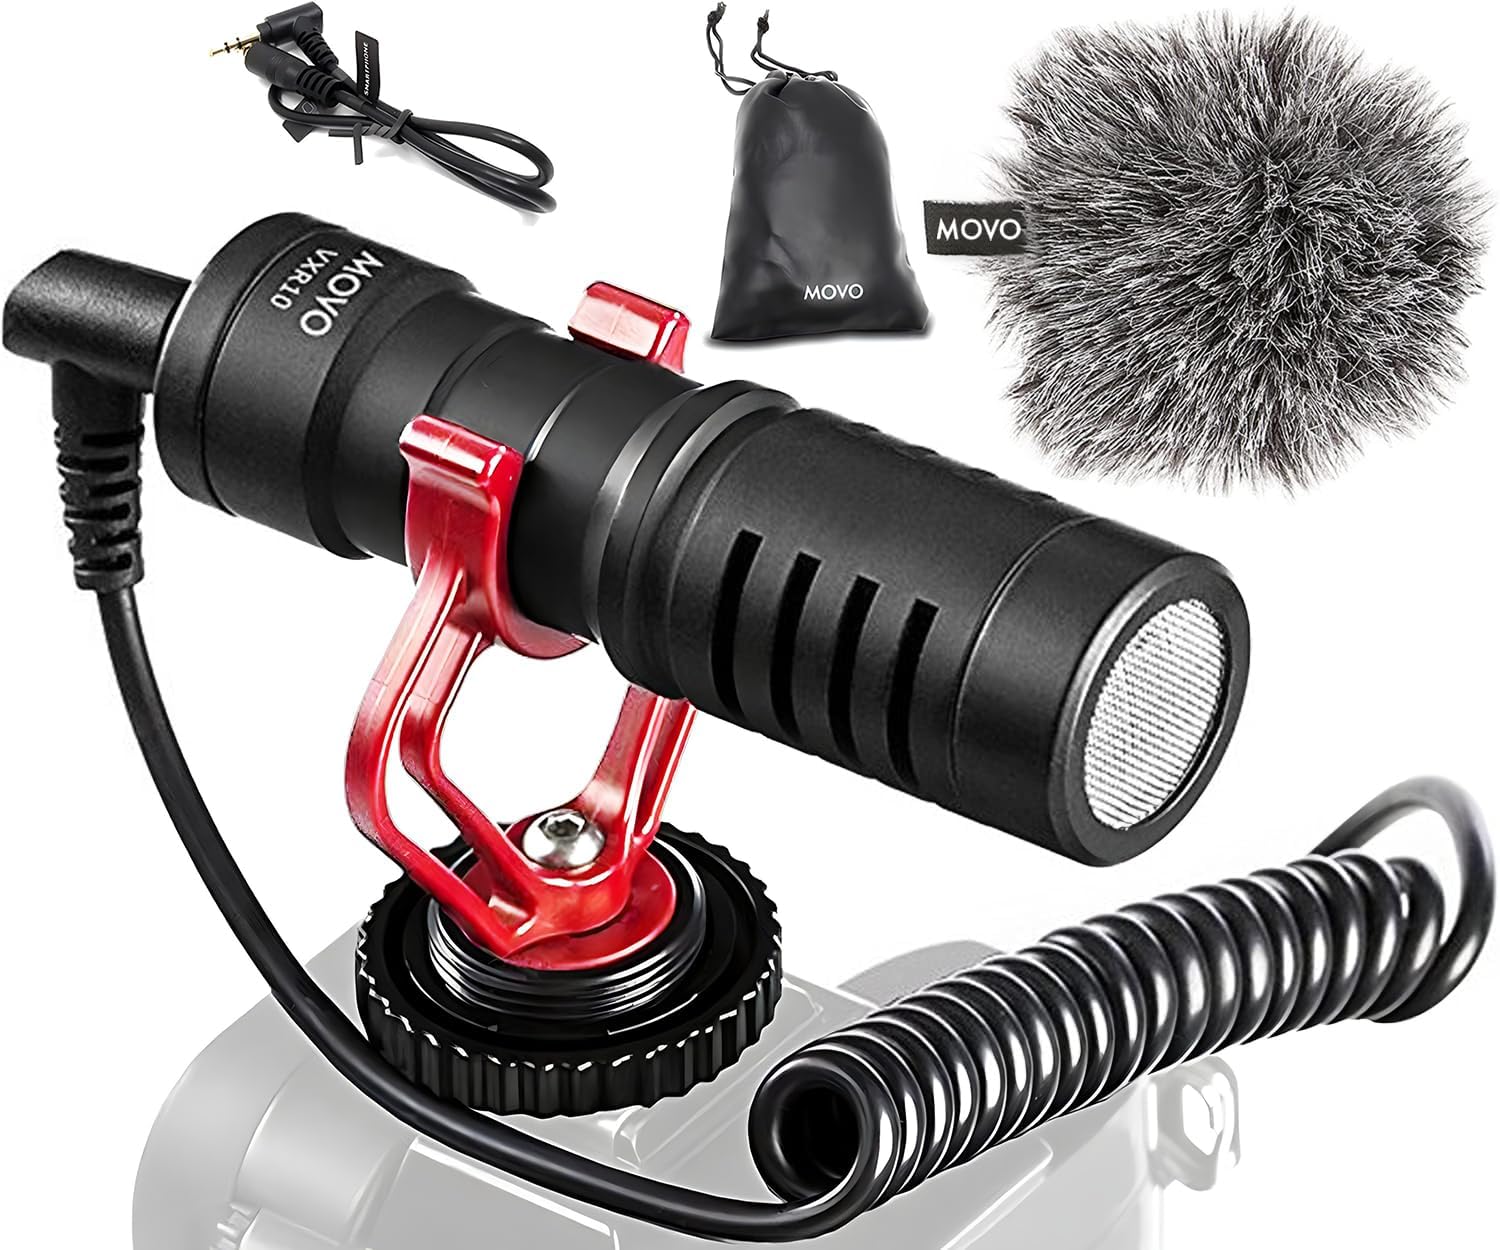 Microphone | equipment for vlogging